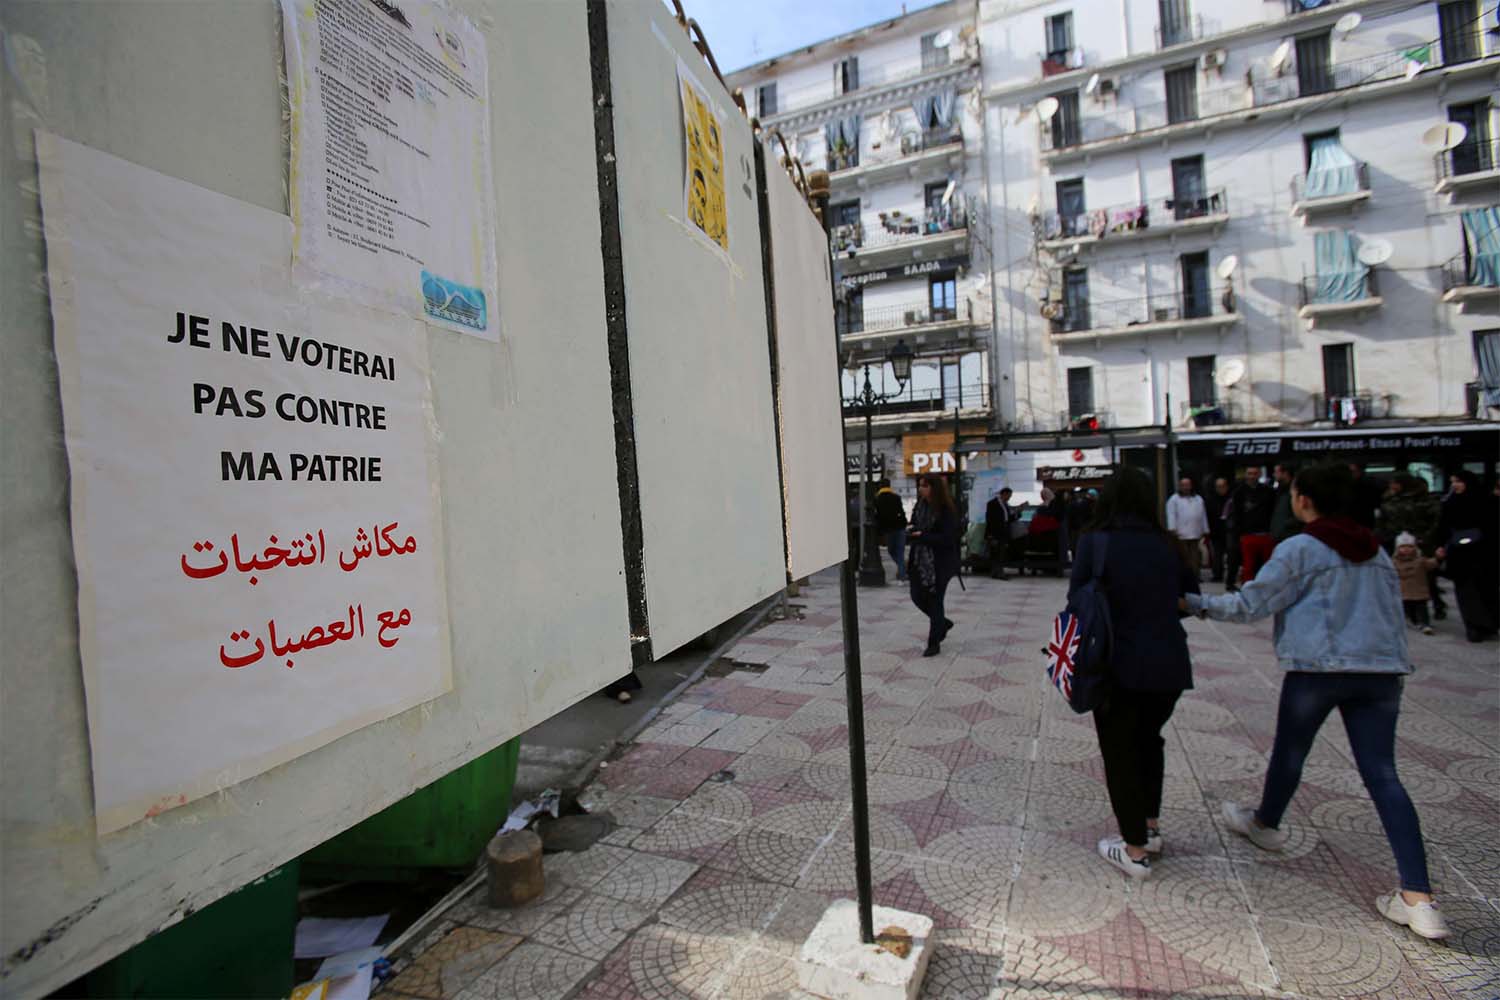 No elections with gangs, reads the poster in Arabic